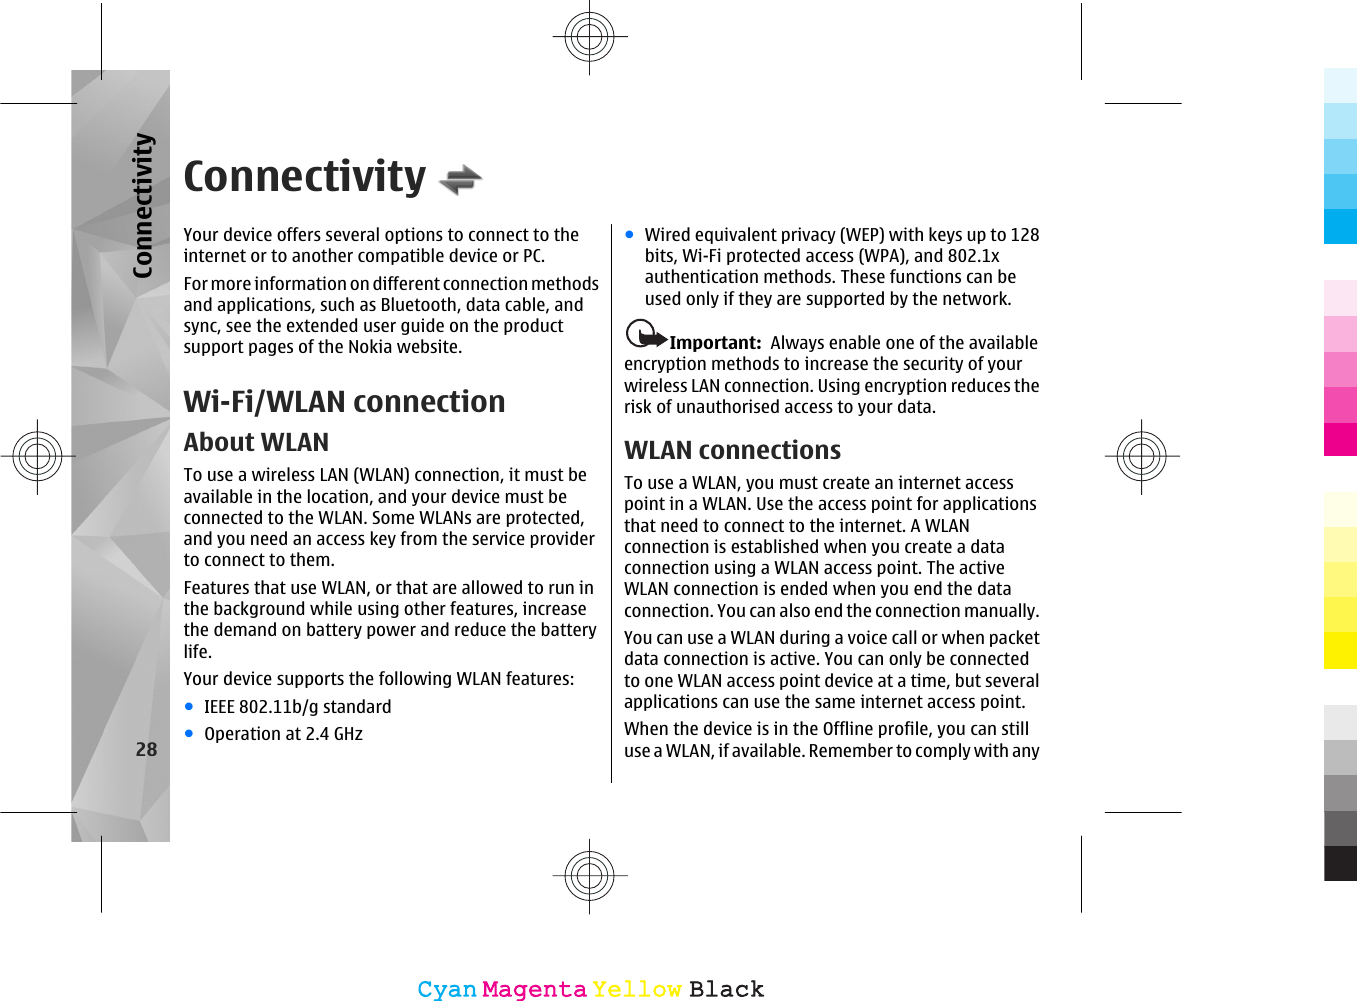 ConnectivityYour device offers several options to connect to theinternet or to another compatible device or PC.For more information on different connection methodsand applications, such as Bluetooth, data cable, andsync, see the extended user guide on the productsupport pages of the Nokia website.Wi-Fi/WLAN connectionAbout WLANTo use a wireless LAN (WLAN) connection, it must beavailable in the location, and your device must beconnected to the WLAN. Some WLANs are protected,and you need an access key from the service providerto connect to them.Features that use WLAN, or that are allowed to run inthe background while using other features, increasethe demand on battery power and reduce the batterylife.Your device supports the following WLAN features:●IEEE 802.11b/g standard●Operation at 2.4 GHz●Wired equivalent privacy (WEP) with keys up to 128bits, Wi-Fi protected access (WPA), and 802.1xauthentication methods. These functions can beused only if they are supported by the network.Important:  Always enable one of the availableencryption methods to increase the security of yourwireless LAN connection. Using encryption reduces therisk of unauthorised access to your data.WLAN connectionsTo use a WLAN, you must create an internet accesspoint in a WLAN. Use the access point for applicationsthat need to connect to the internet. A WLANconnection is established when you create a dataconnection using a WLAN access point. The activeWLAN connection is ended when you end the dataconnection. You can also end the connection manually.You can use a WLAN during a voice call or when packetdata connection is active. You can only be connectedto one WLAN access point device at a time, but severalapplications can use the same internet access point.When the device is in the Offline profile, you can stilluse a WLAN, if available. Remember to comply with any28ConnectivityCyanCyanMagentaMagentaYellowYellowBlackBlack